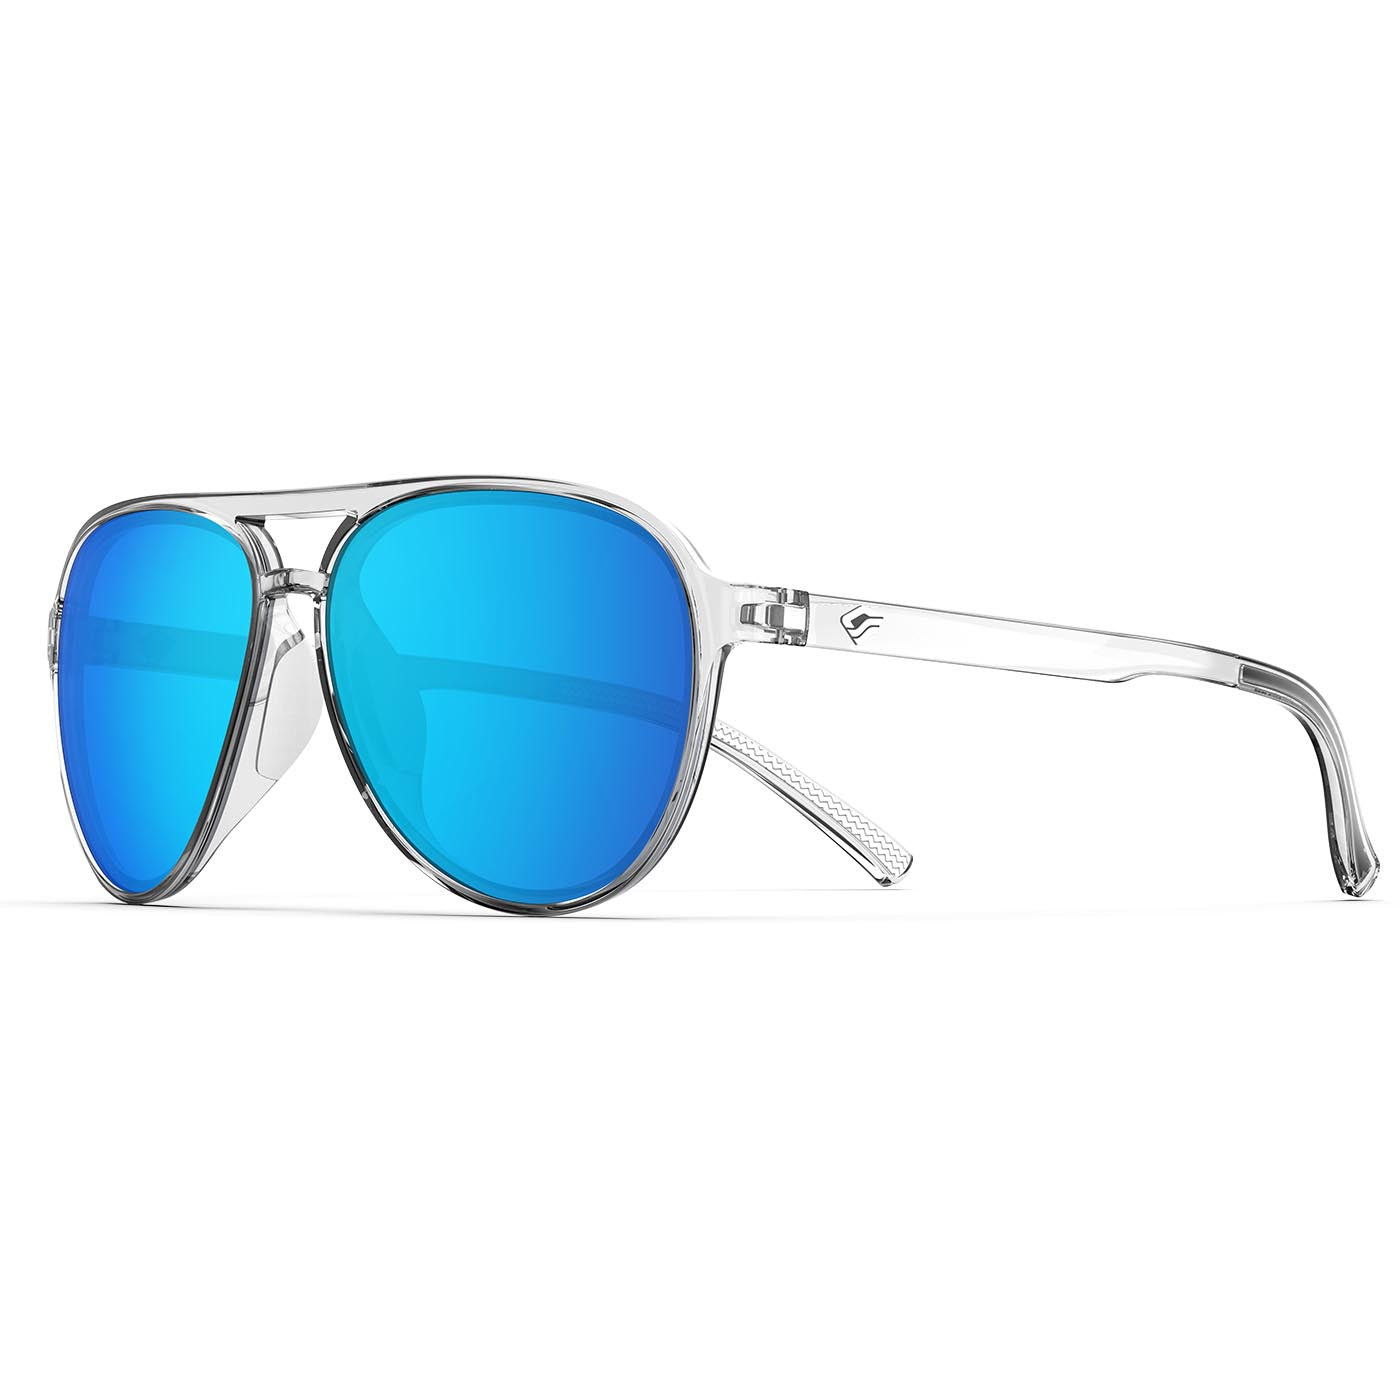 Crystal Sky Polarized Aviator Sunglasses for Men and Women - Lifetime Warranty - Perfect for Sports, Fishing, Boating, Beach, Golf & Driving 